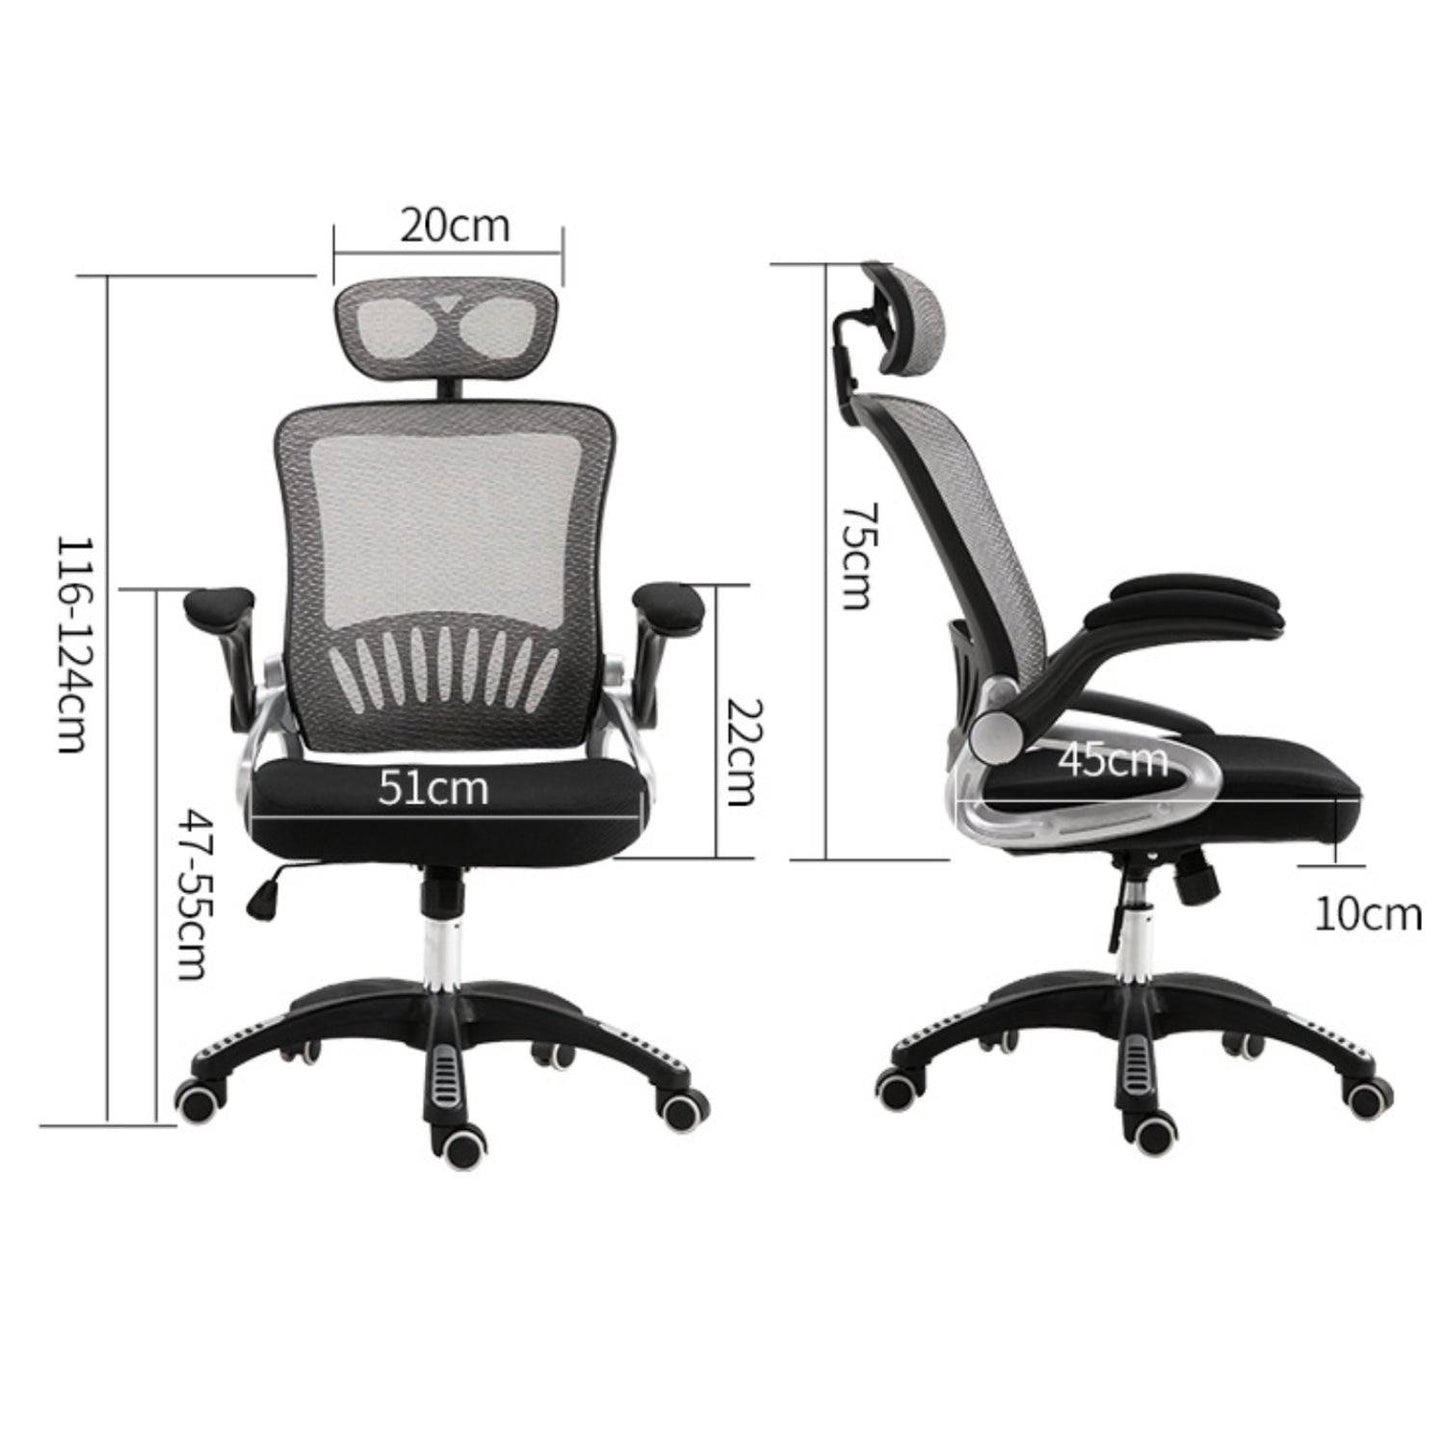 COOLBABY BGY03 COOLBABY Ergonomic Office Gaming Chair - COOLBABY